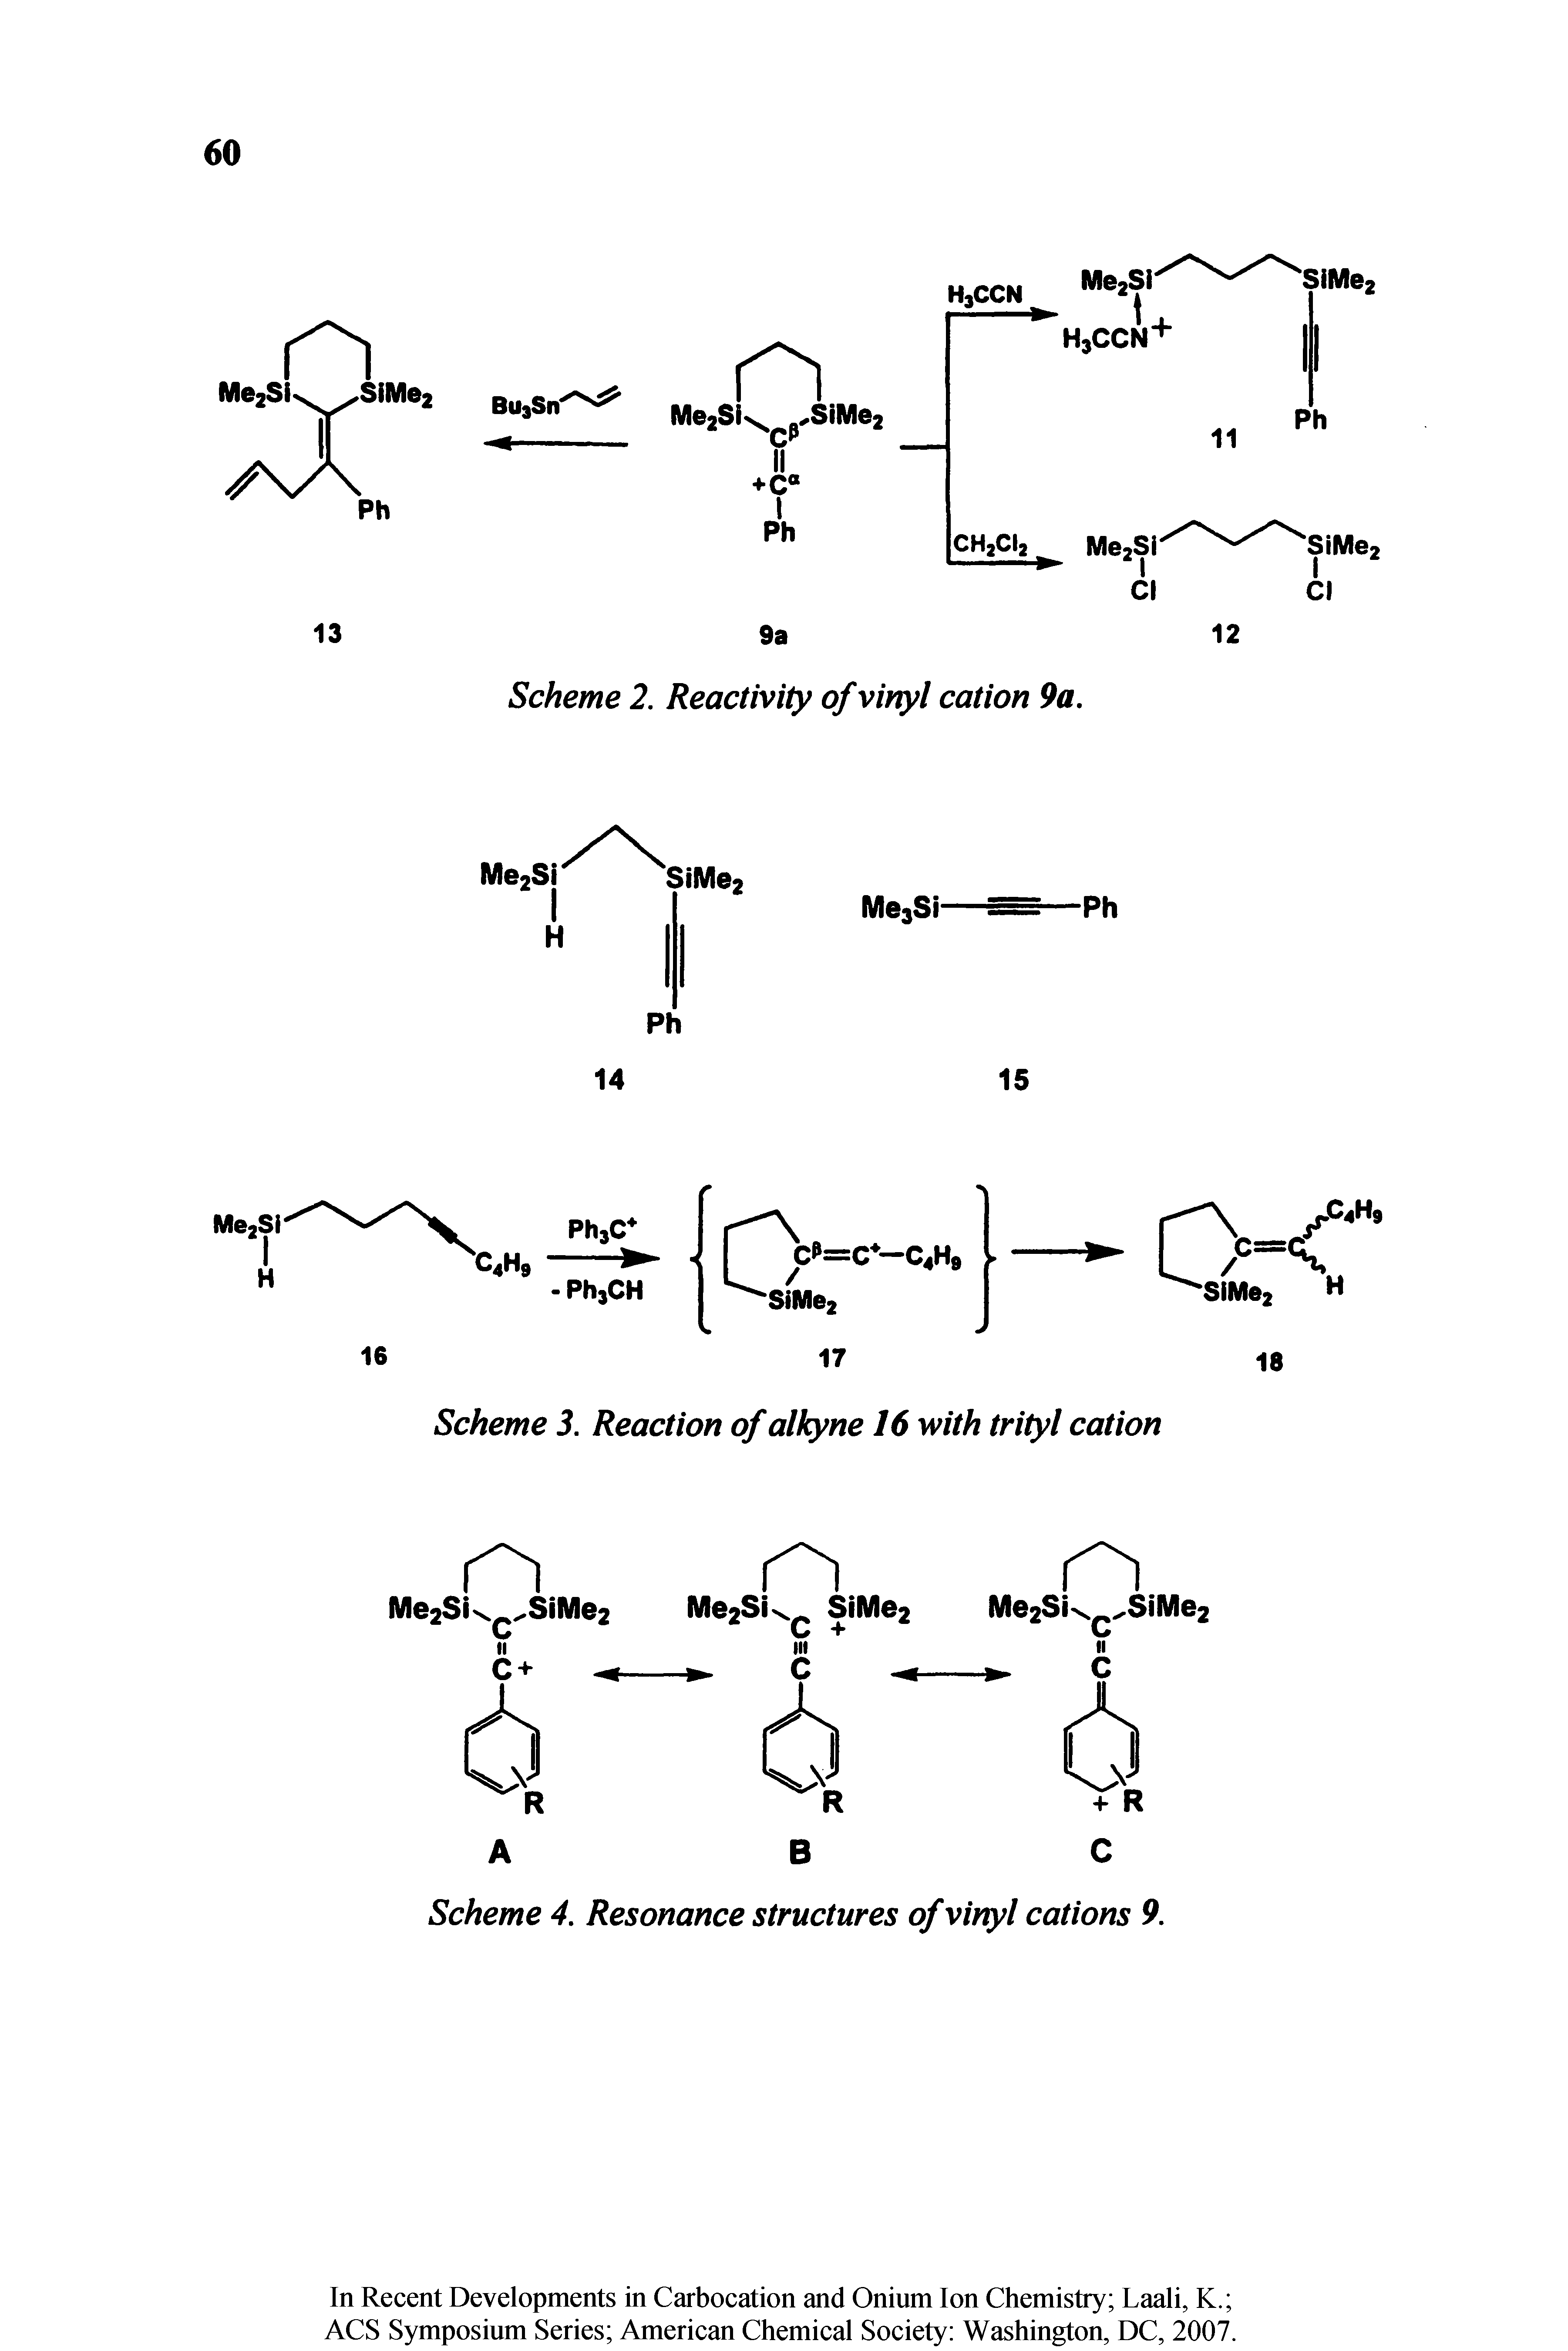 Scheme 3. Reaction of alkyne 16 with trityl cation...